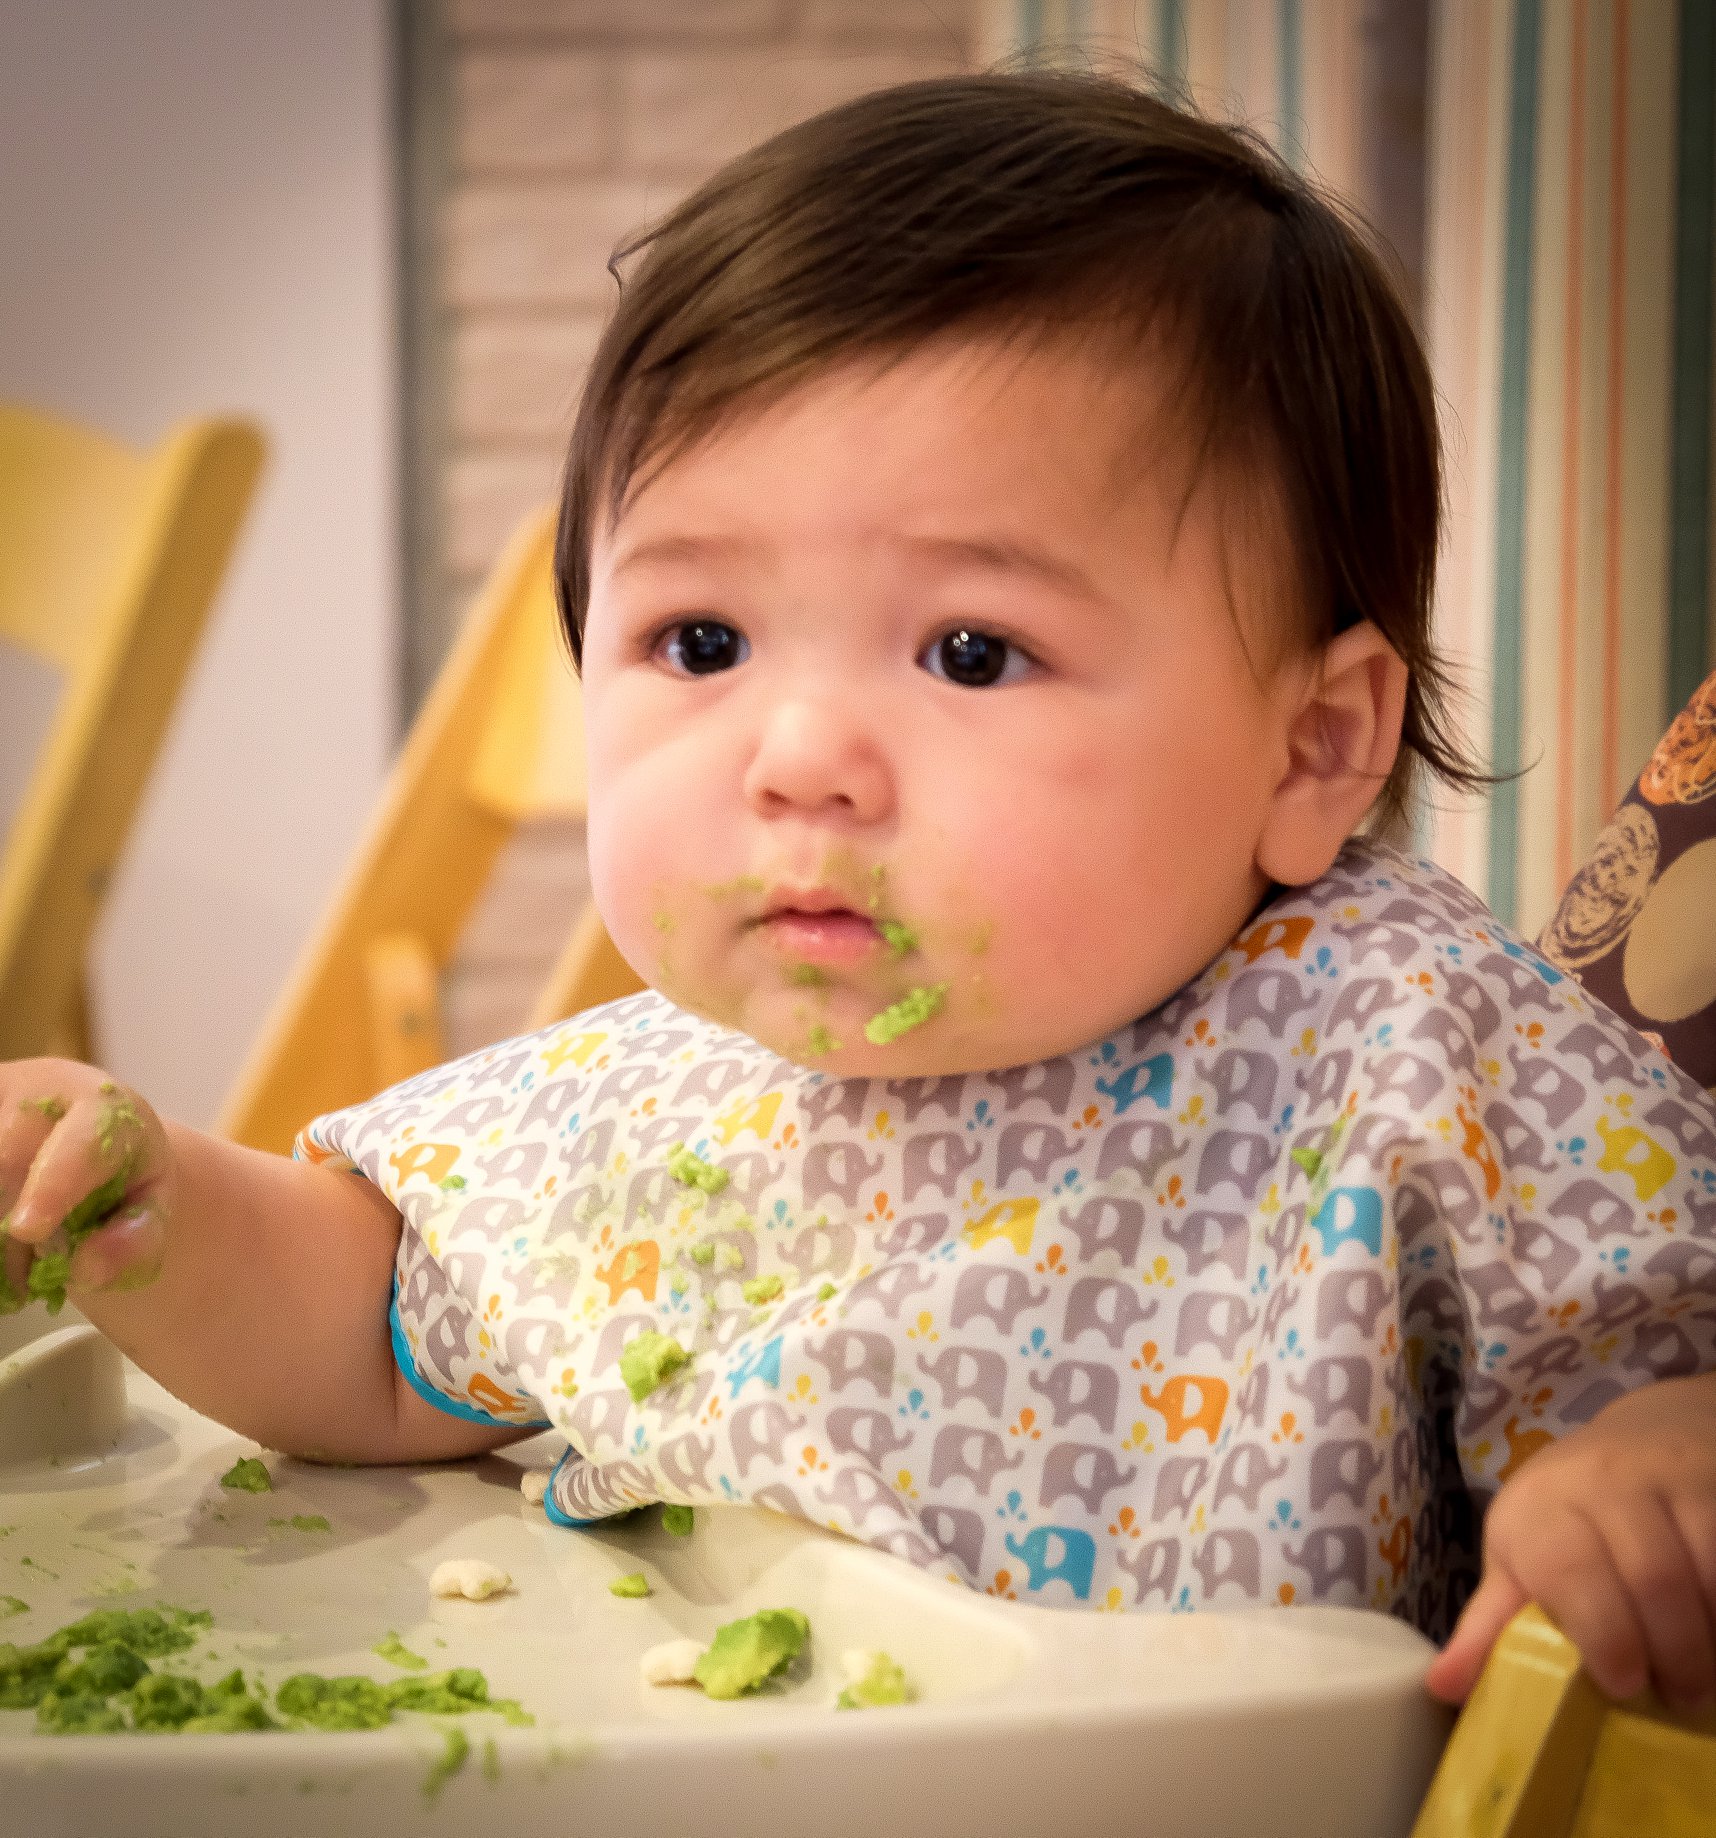  baby girl  in high chair eating with green peas on chin 